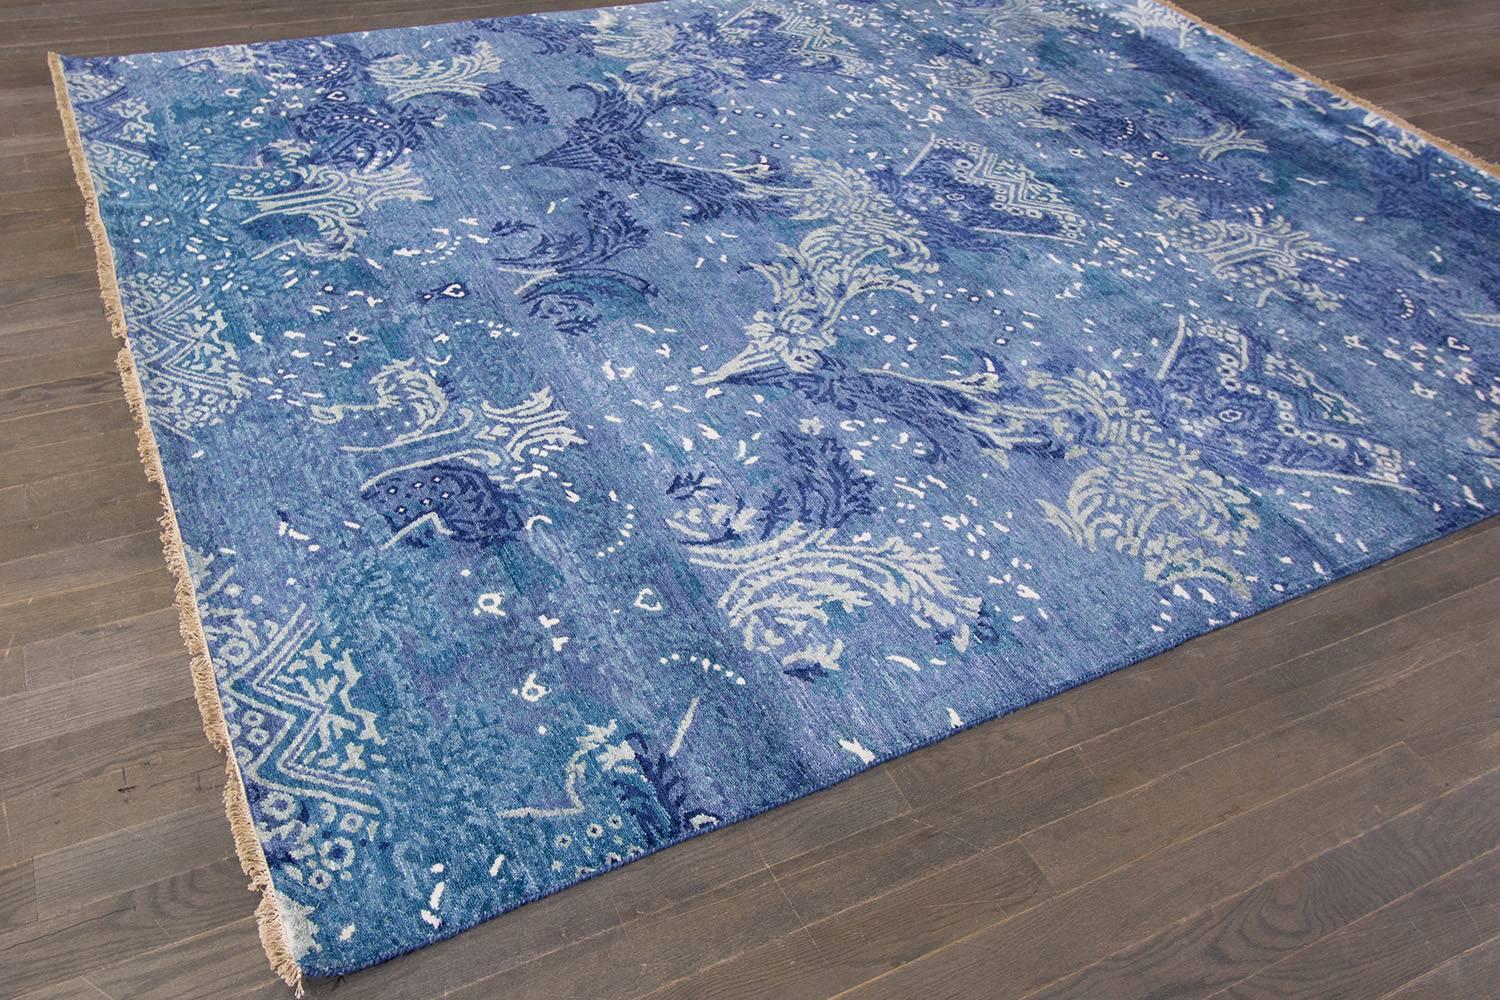 Hand-knotted Indian rug with an all-over design on a blue field.